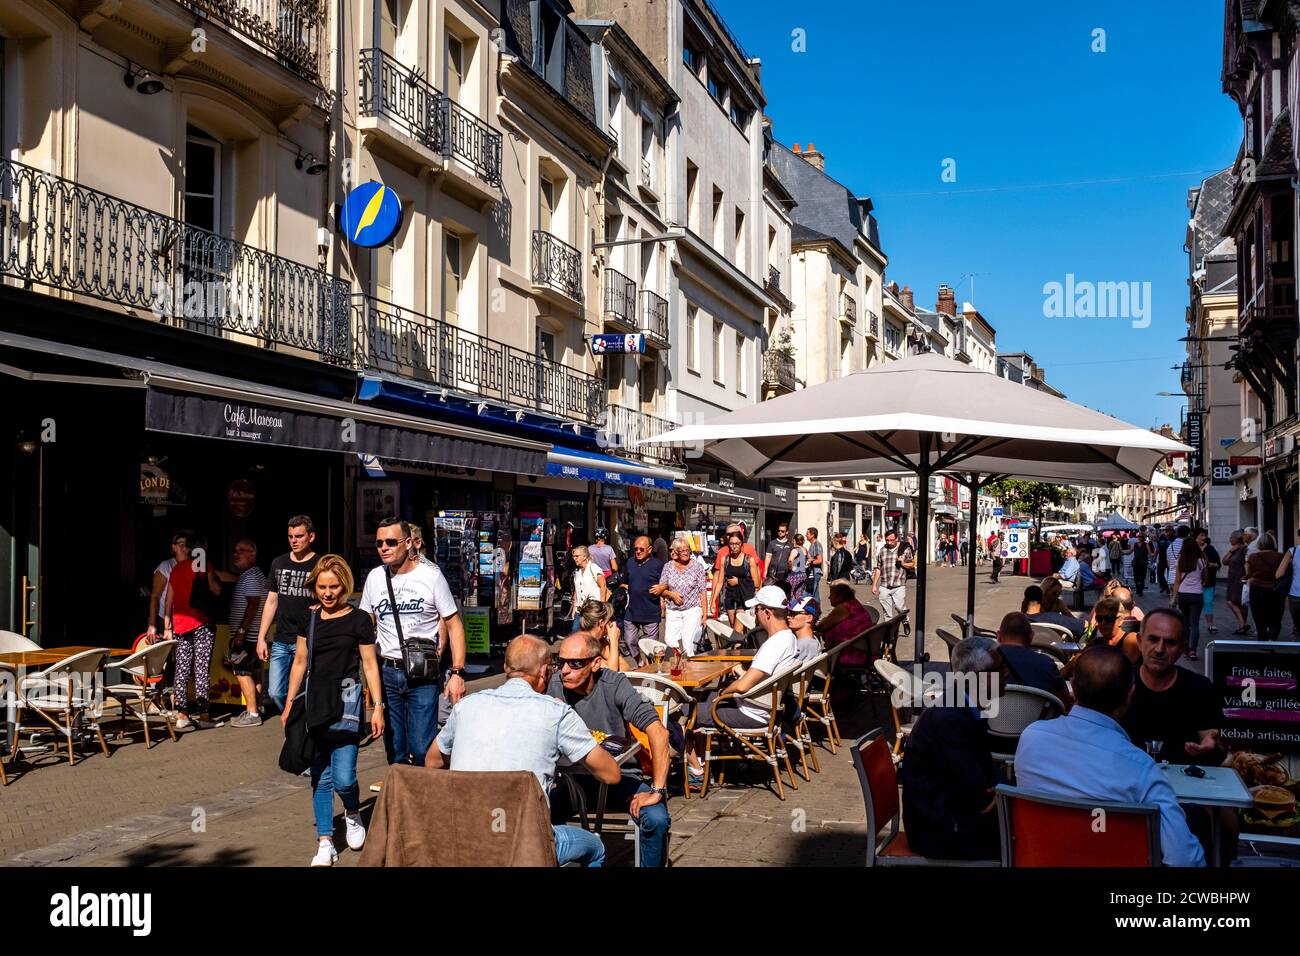 Local People Sitting At A Street Cafe In The Town Of Dieppe, Normandy, France. Stock Photo